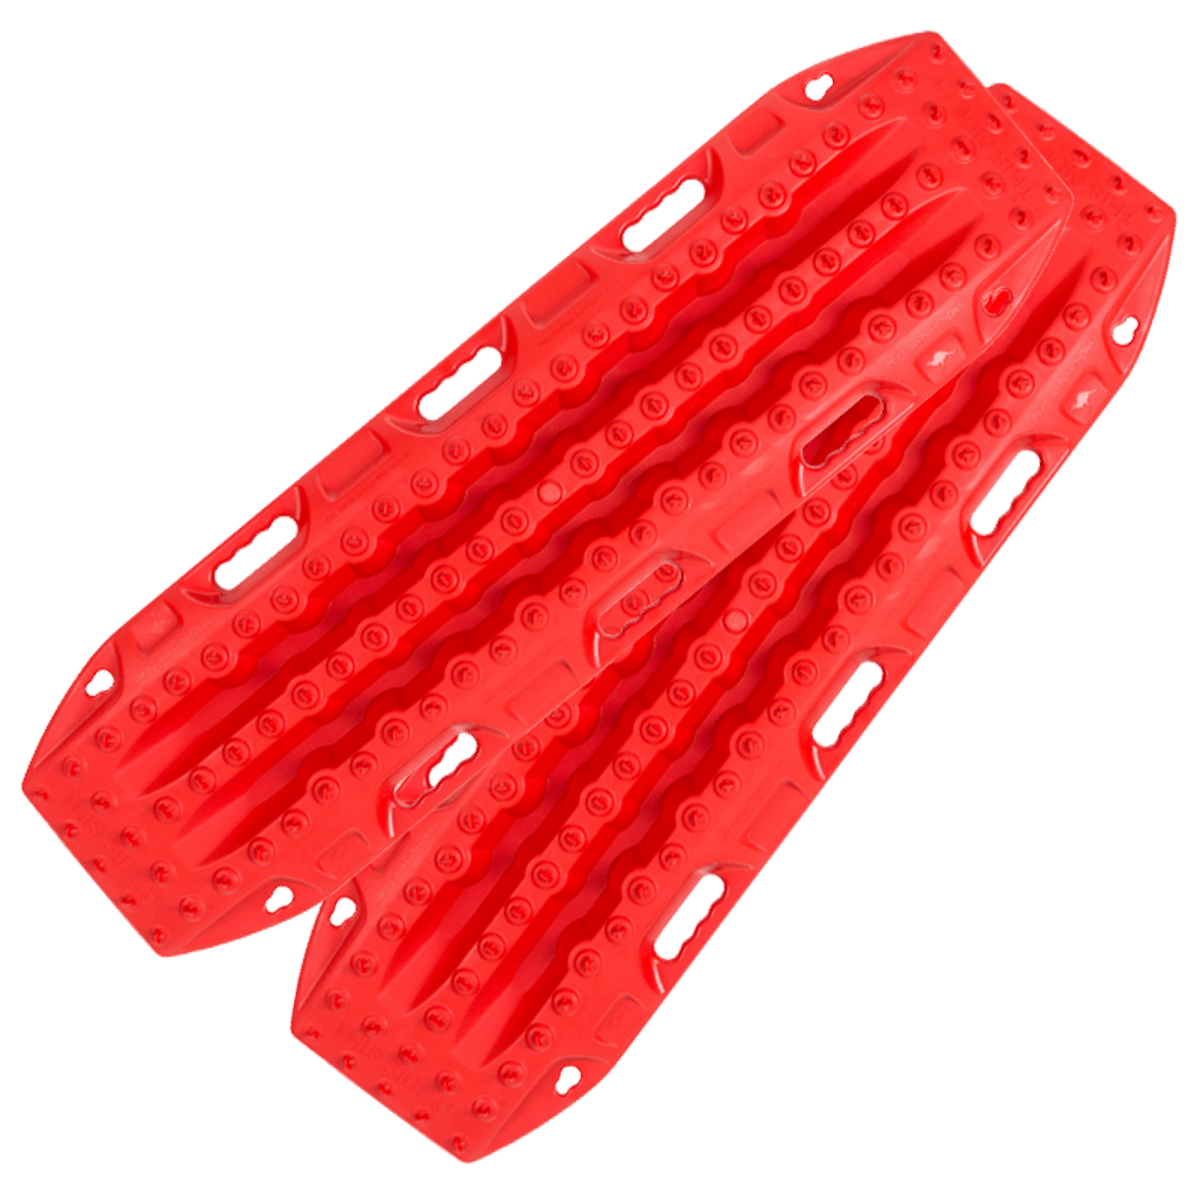 MAXTRAX MKII FJ Red Recovery Boards - Overland Bound